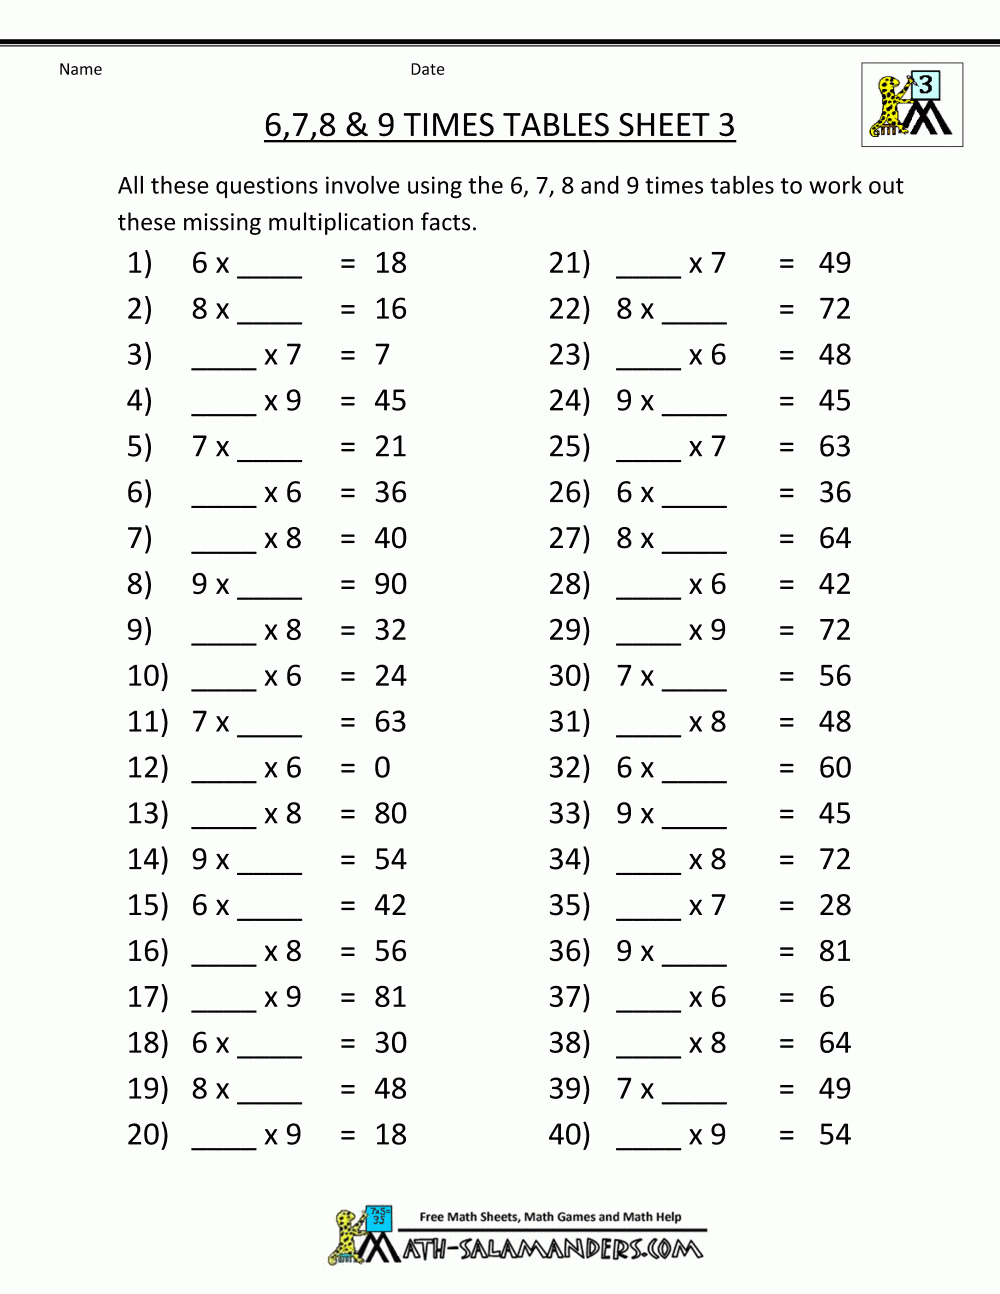 Free Multiplication Worksheets 6 7 8 9 Times Tables 3 throughout Multiplication Worksheets 6 Times Tables